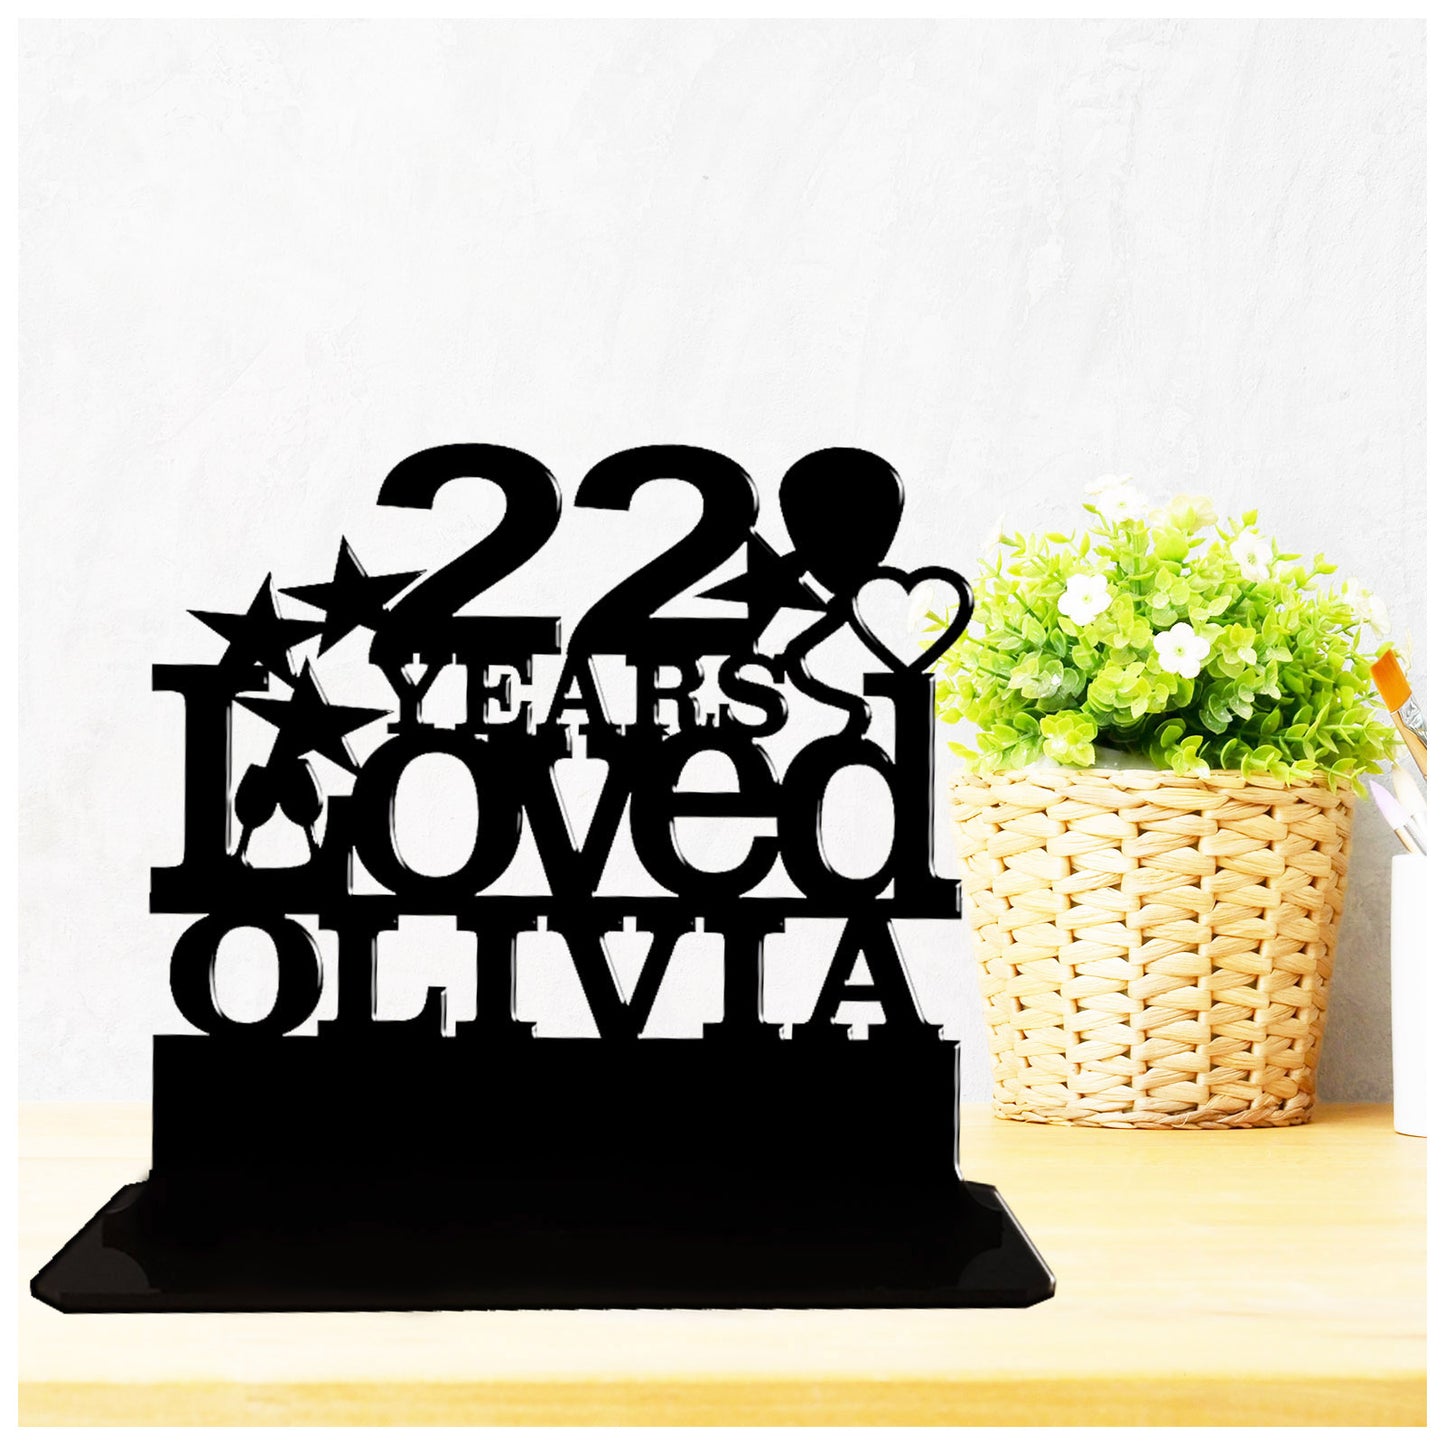 Personalised 22nd birthday gift featuring our Years Loved birthday design theme. This present is an acrylic keepsake ornamental plaque.